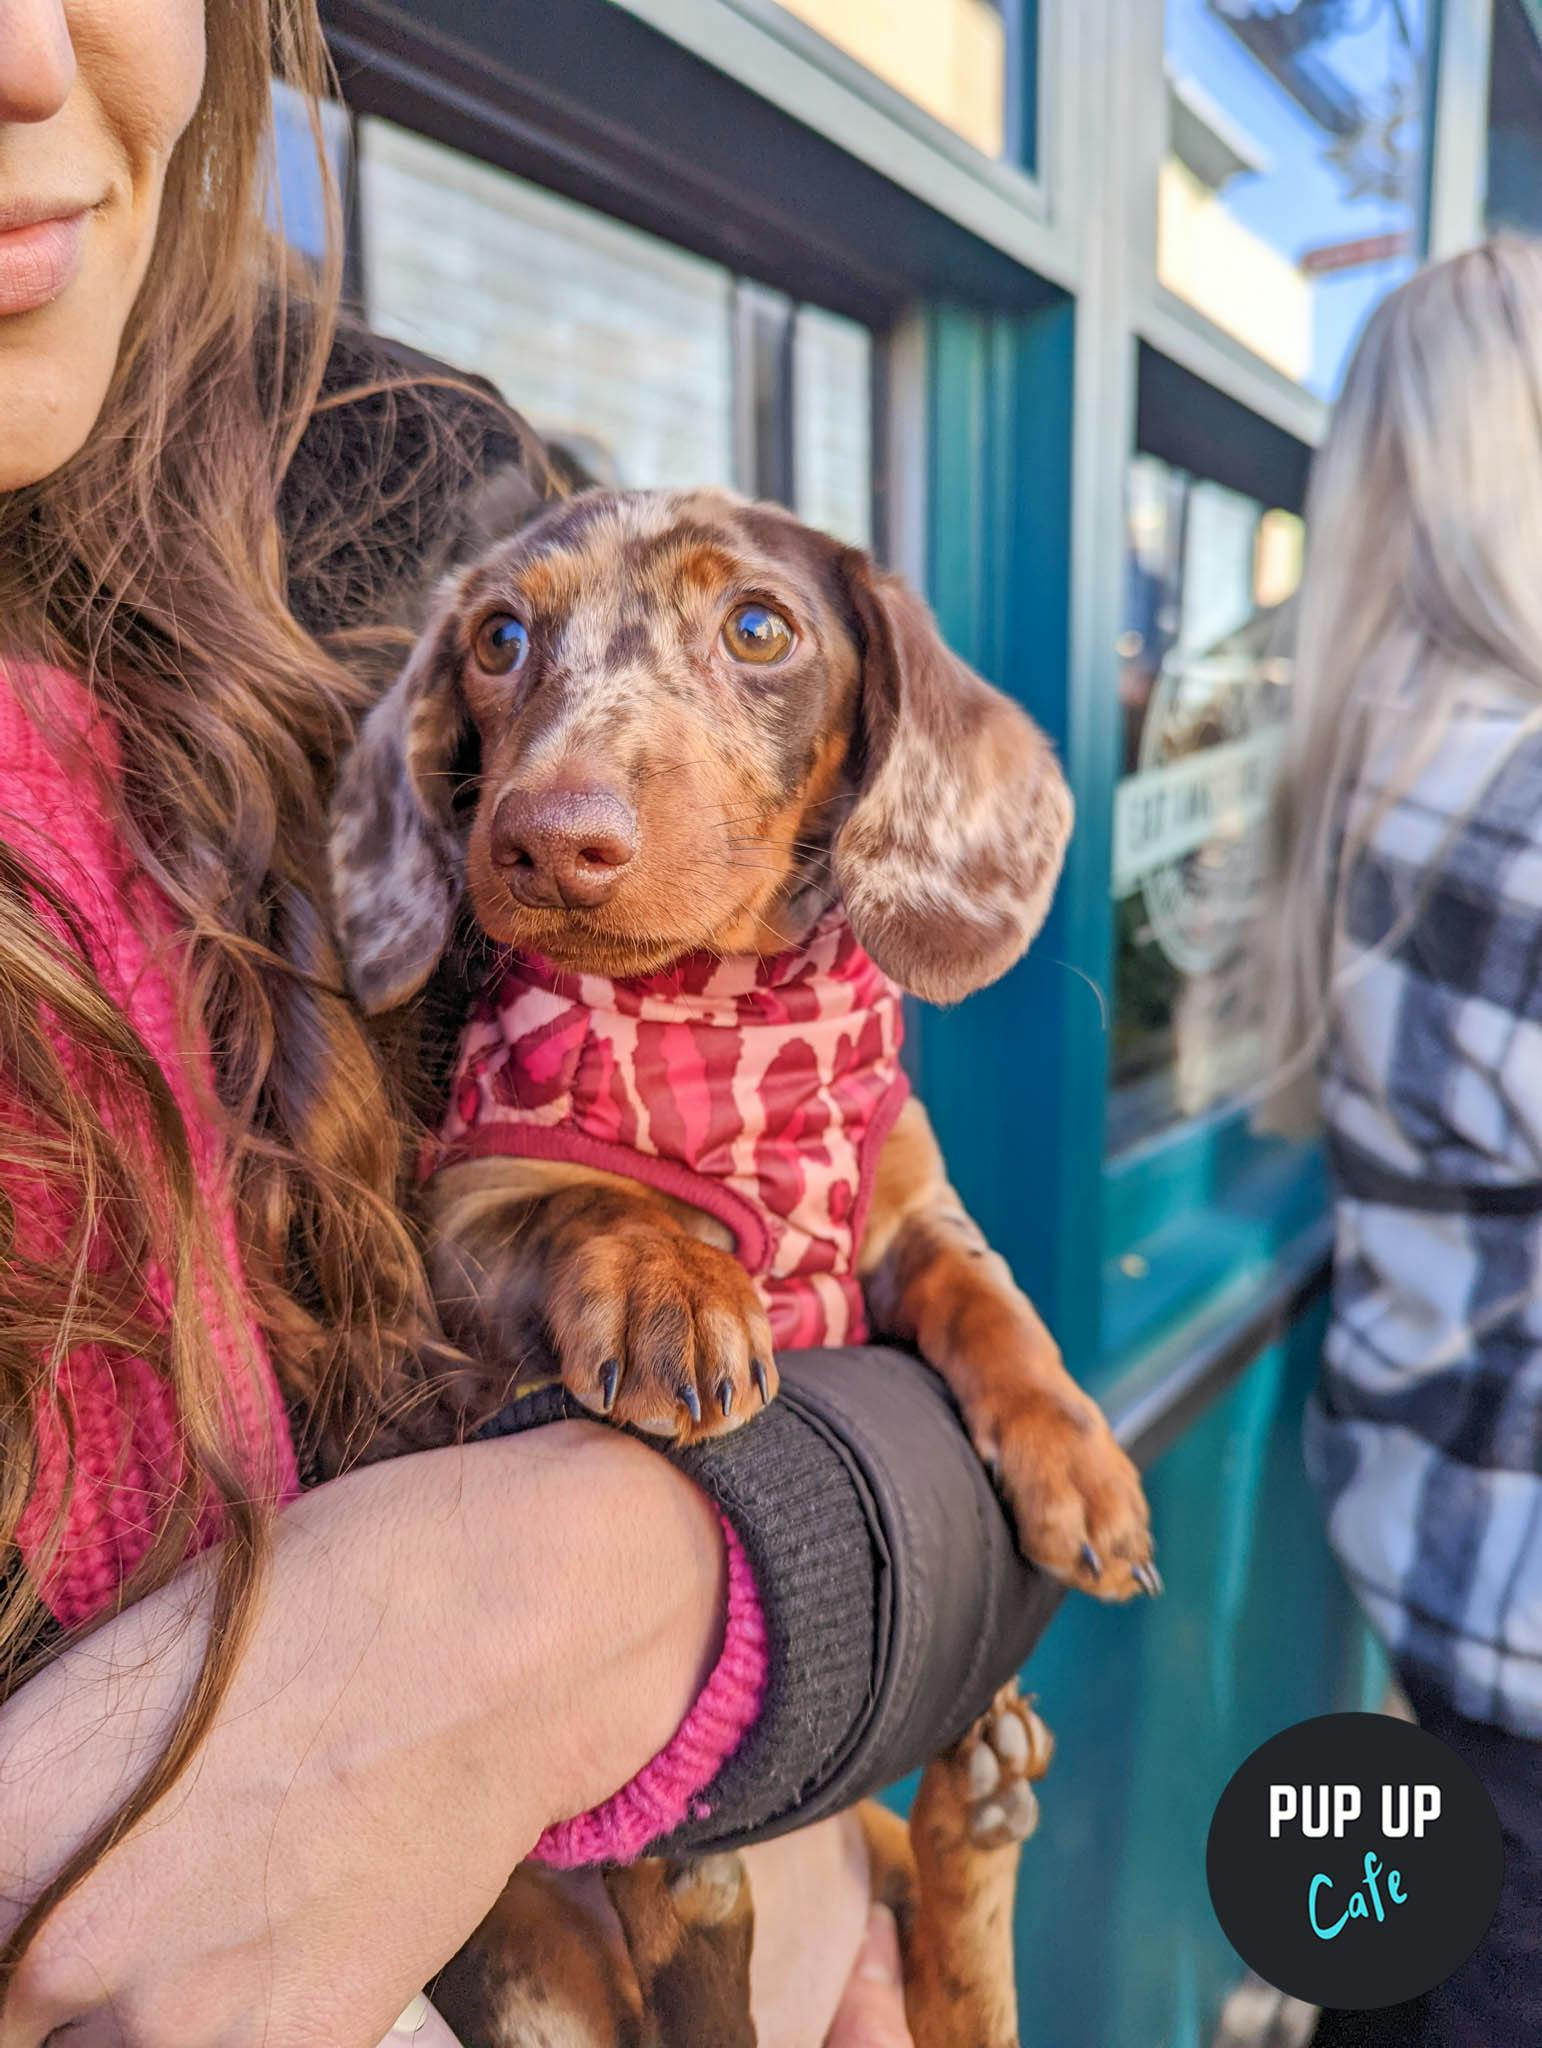 Cambridge Live Visits Pup Up Cafe and it was ‘love at first sight’!